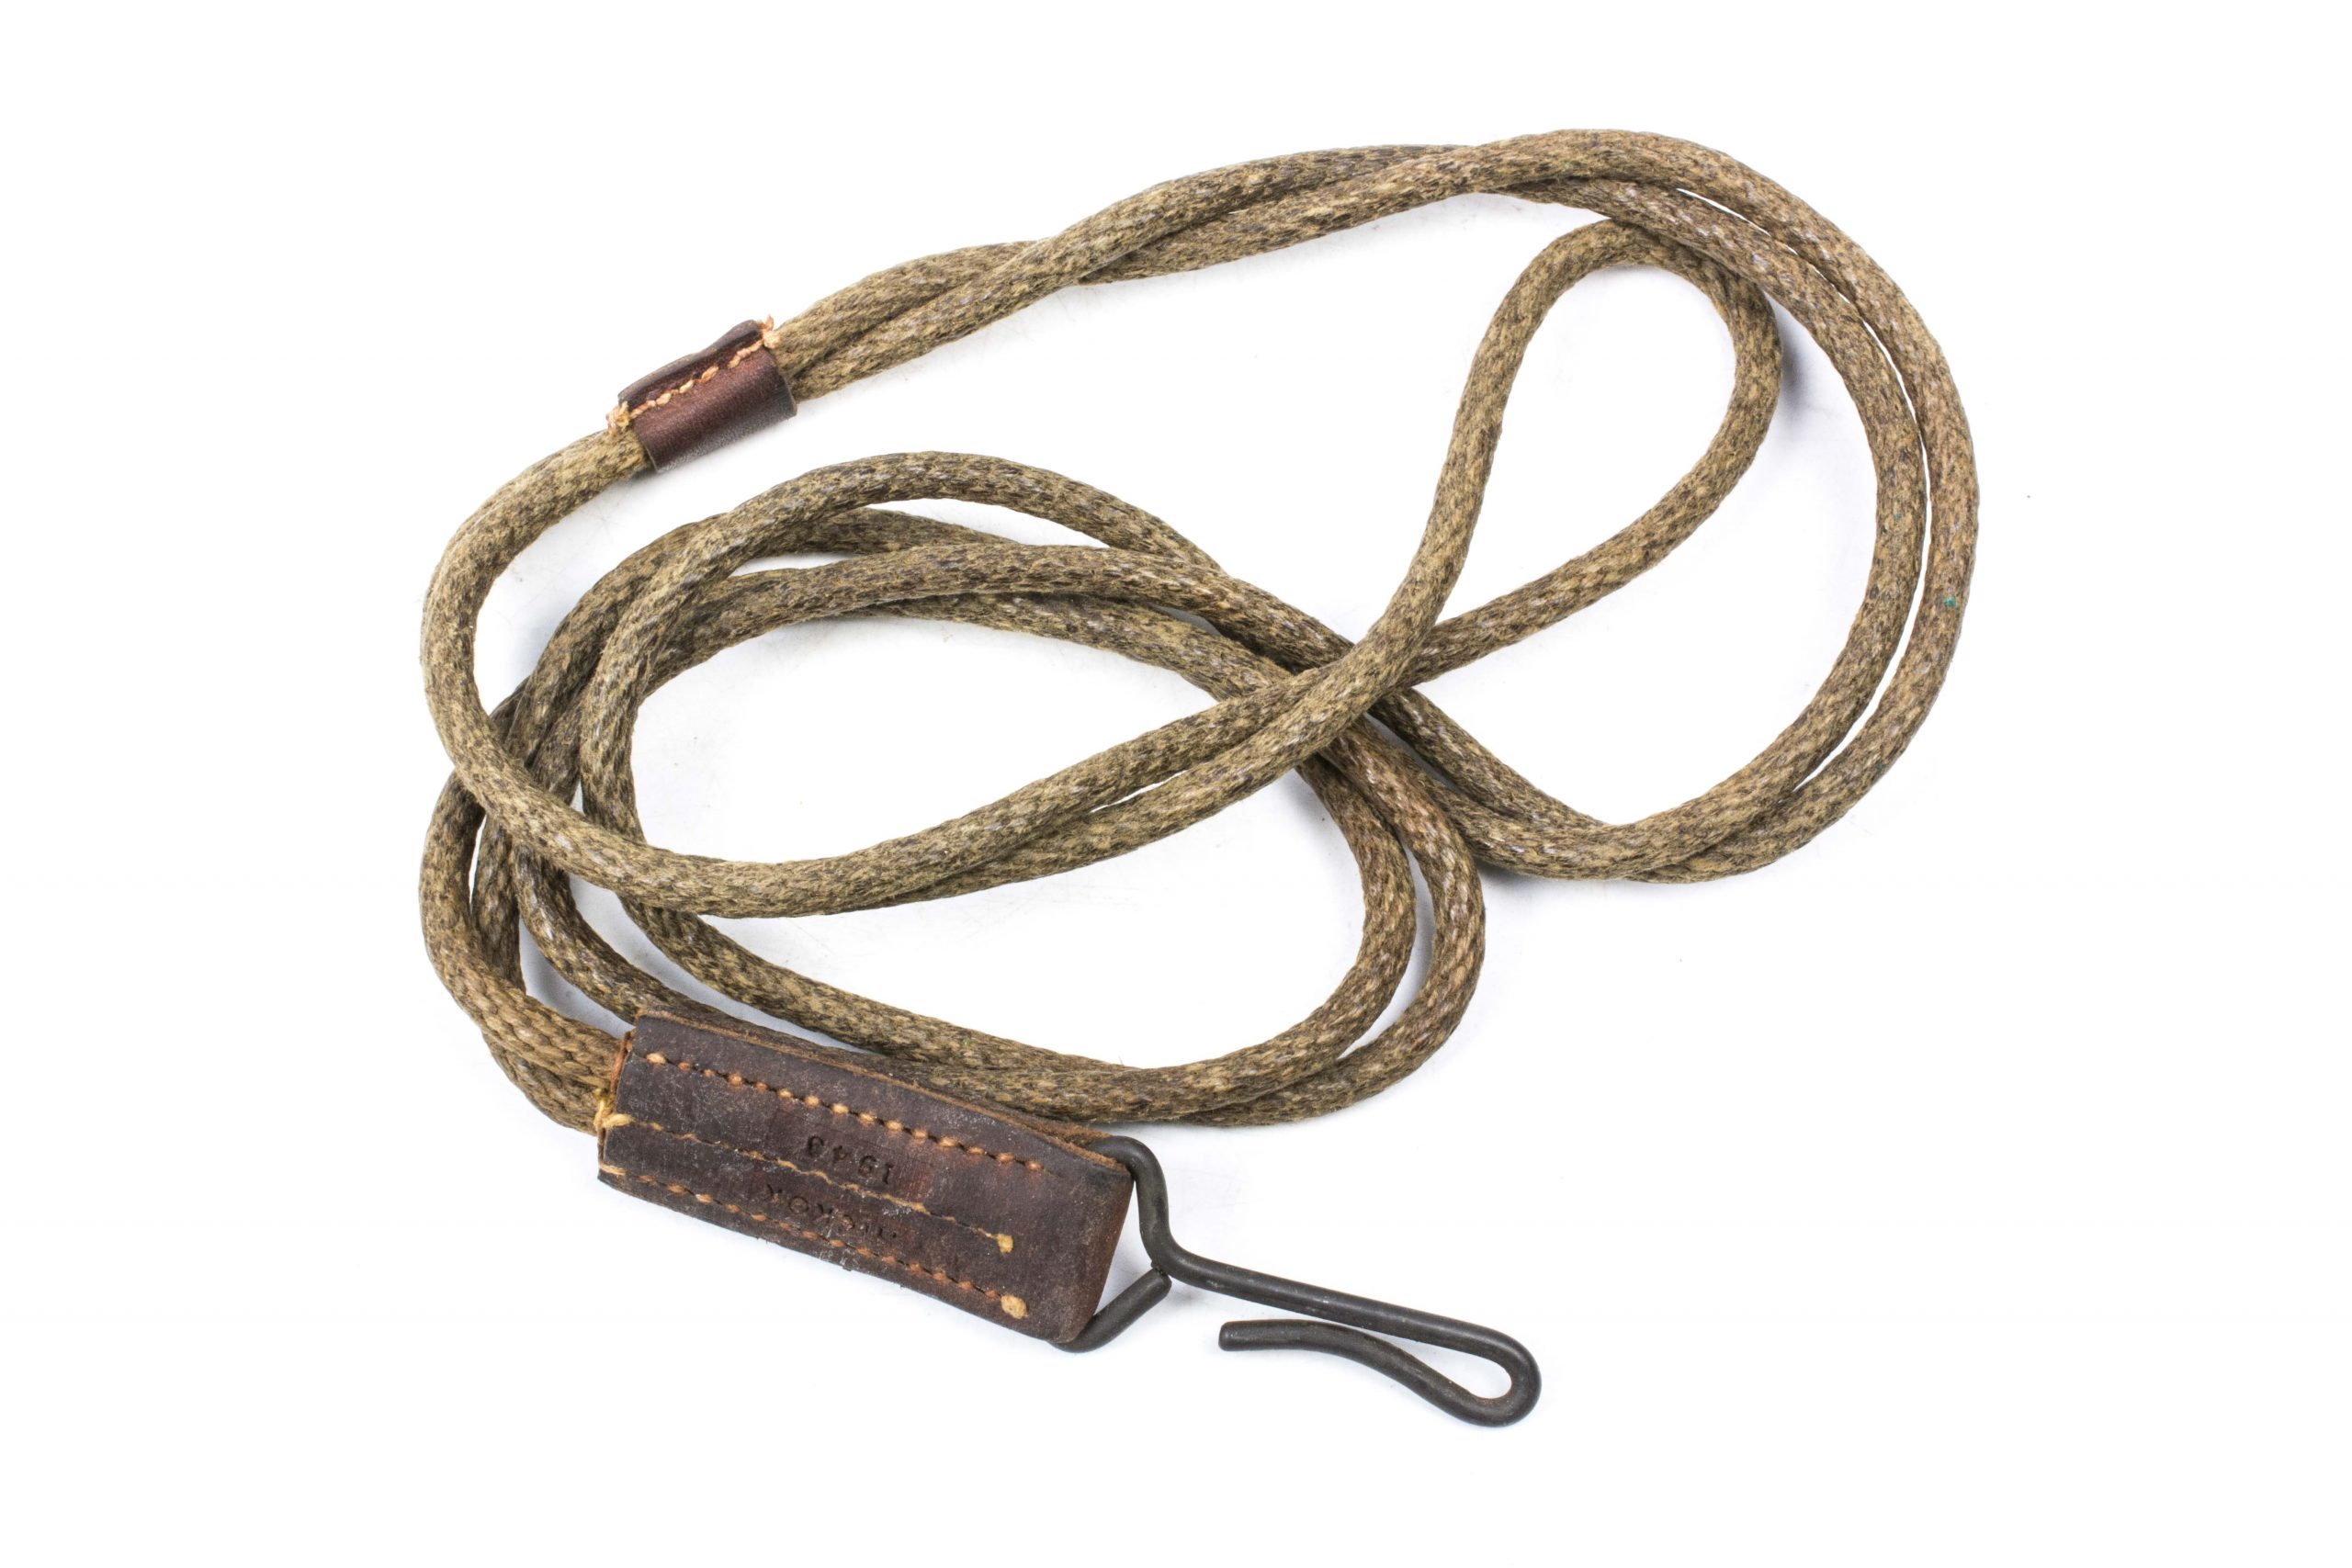 Reproduction WWII US Army M1943 Hickok Pistol Lanyard for Colt M1911 .45acp